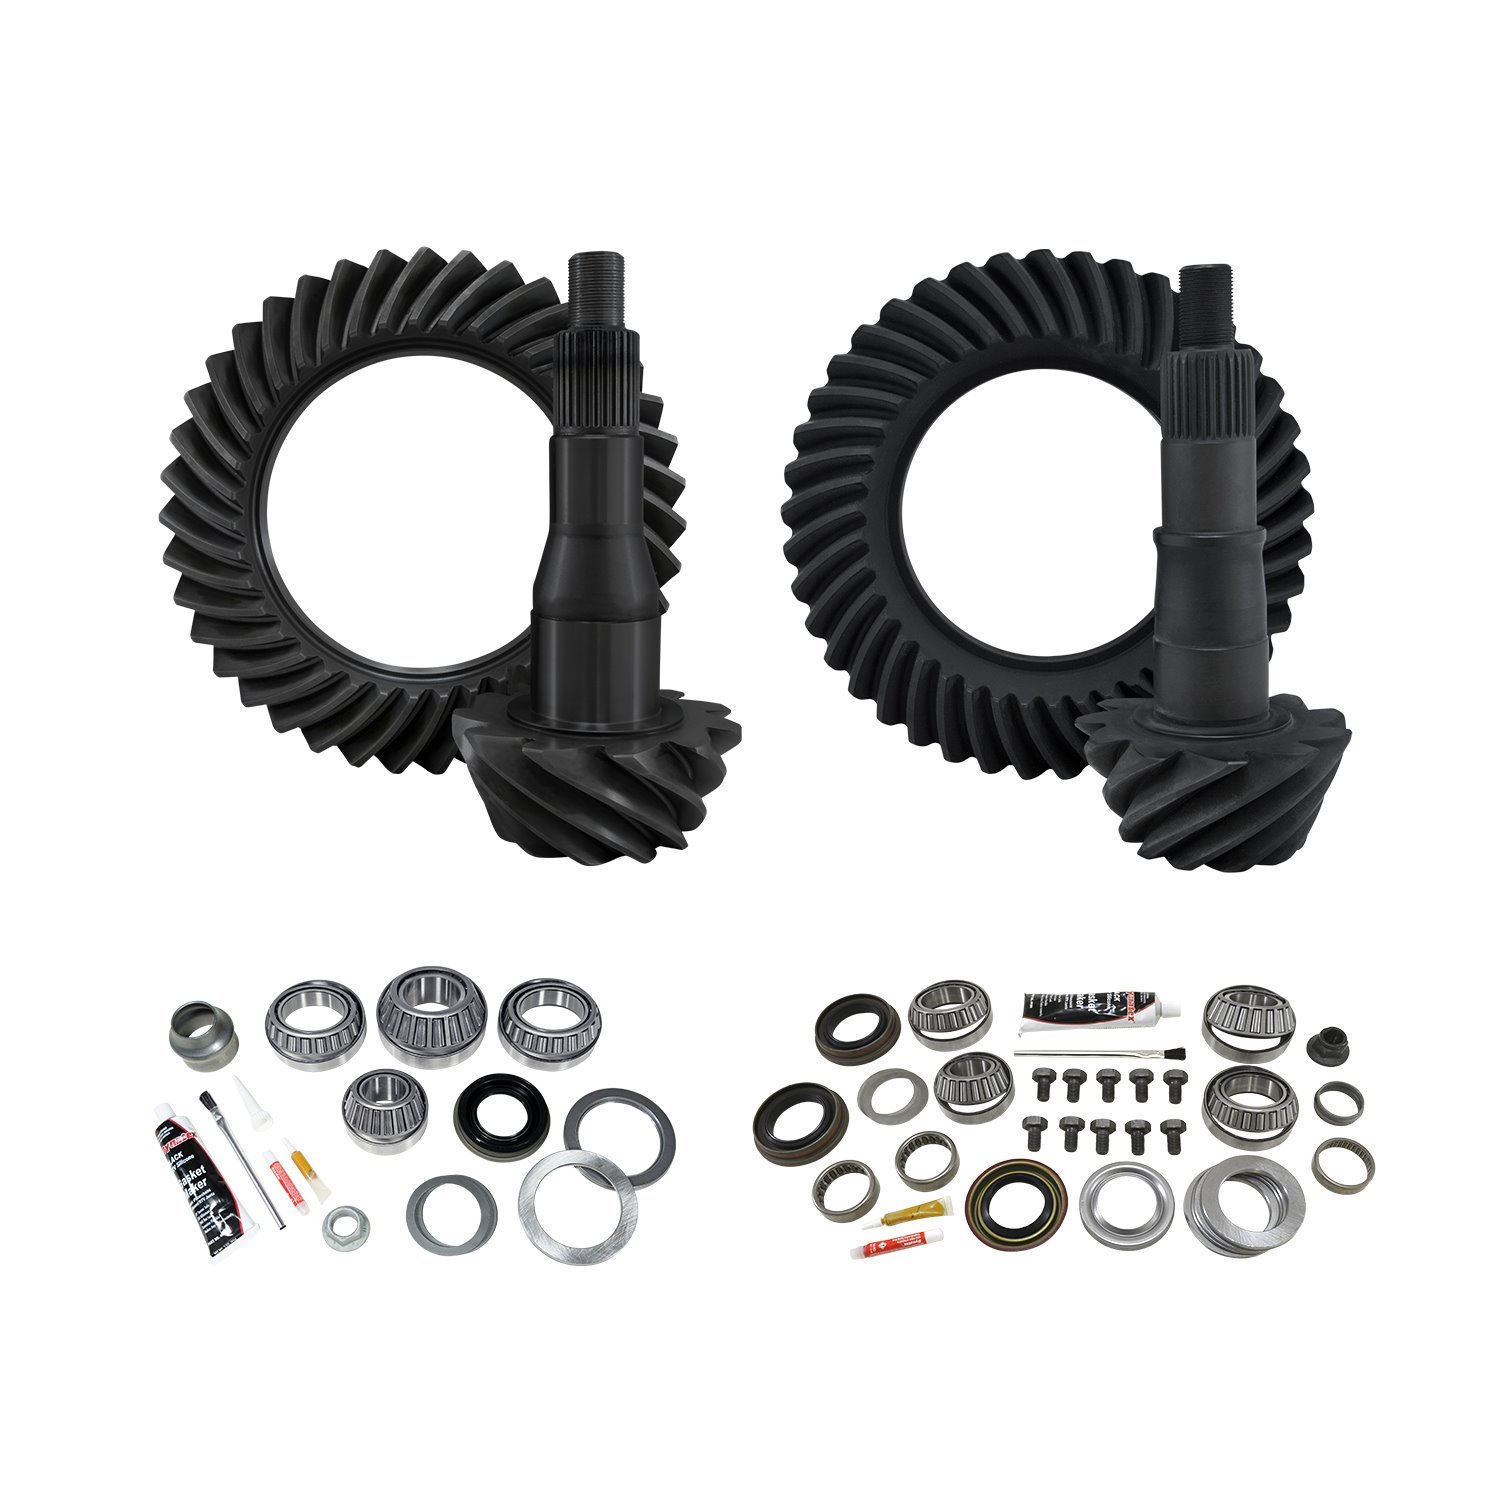 Re-Gear & Installation Kit, Ford 9.75 in., Various F150, 4.11 Ratio, Fr&Rr